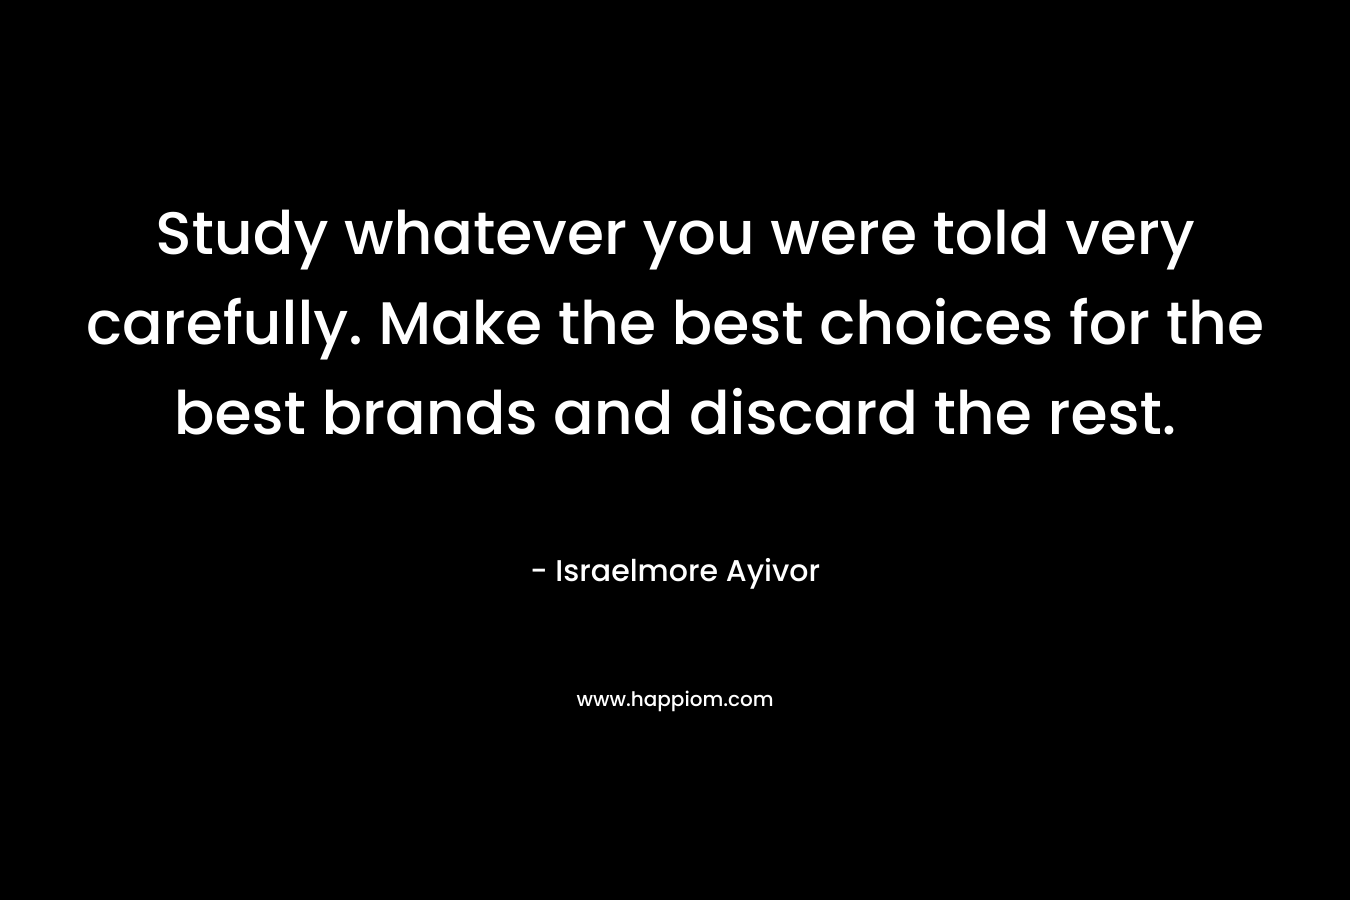 Study whatever you were told very carefully. Make the best choices for the best brands and discard the rest. – Israelmore Ayivor